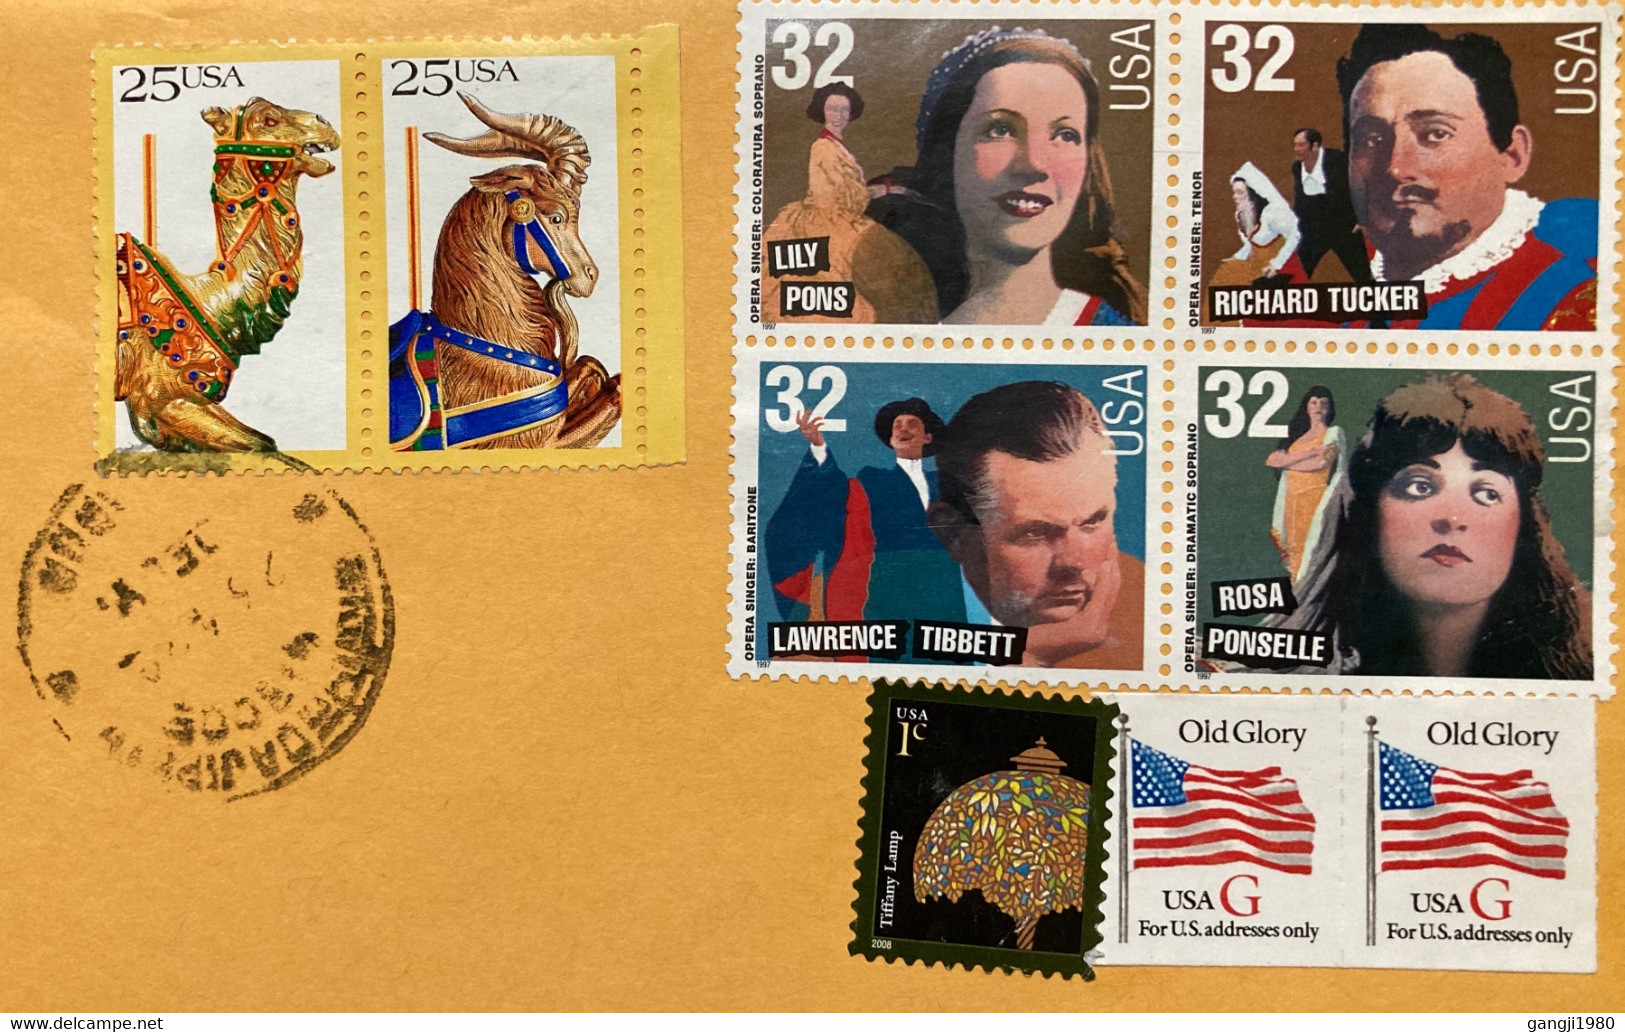 USA 2022,CAMEL ,HORSE,DEER ,OPERA SINGER 4 DIFFERENT FAMOUS,FLAG ,LAMP 9 STAMPS COVER TO INDIA - Storia Postale